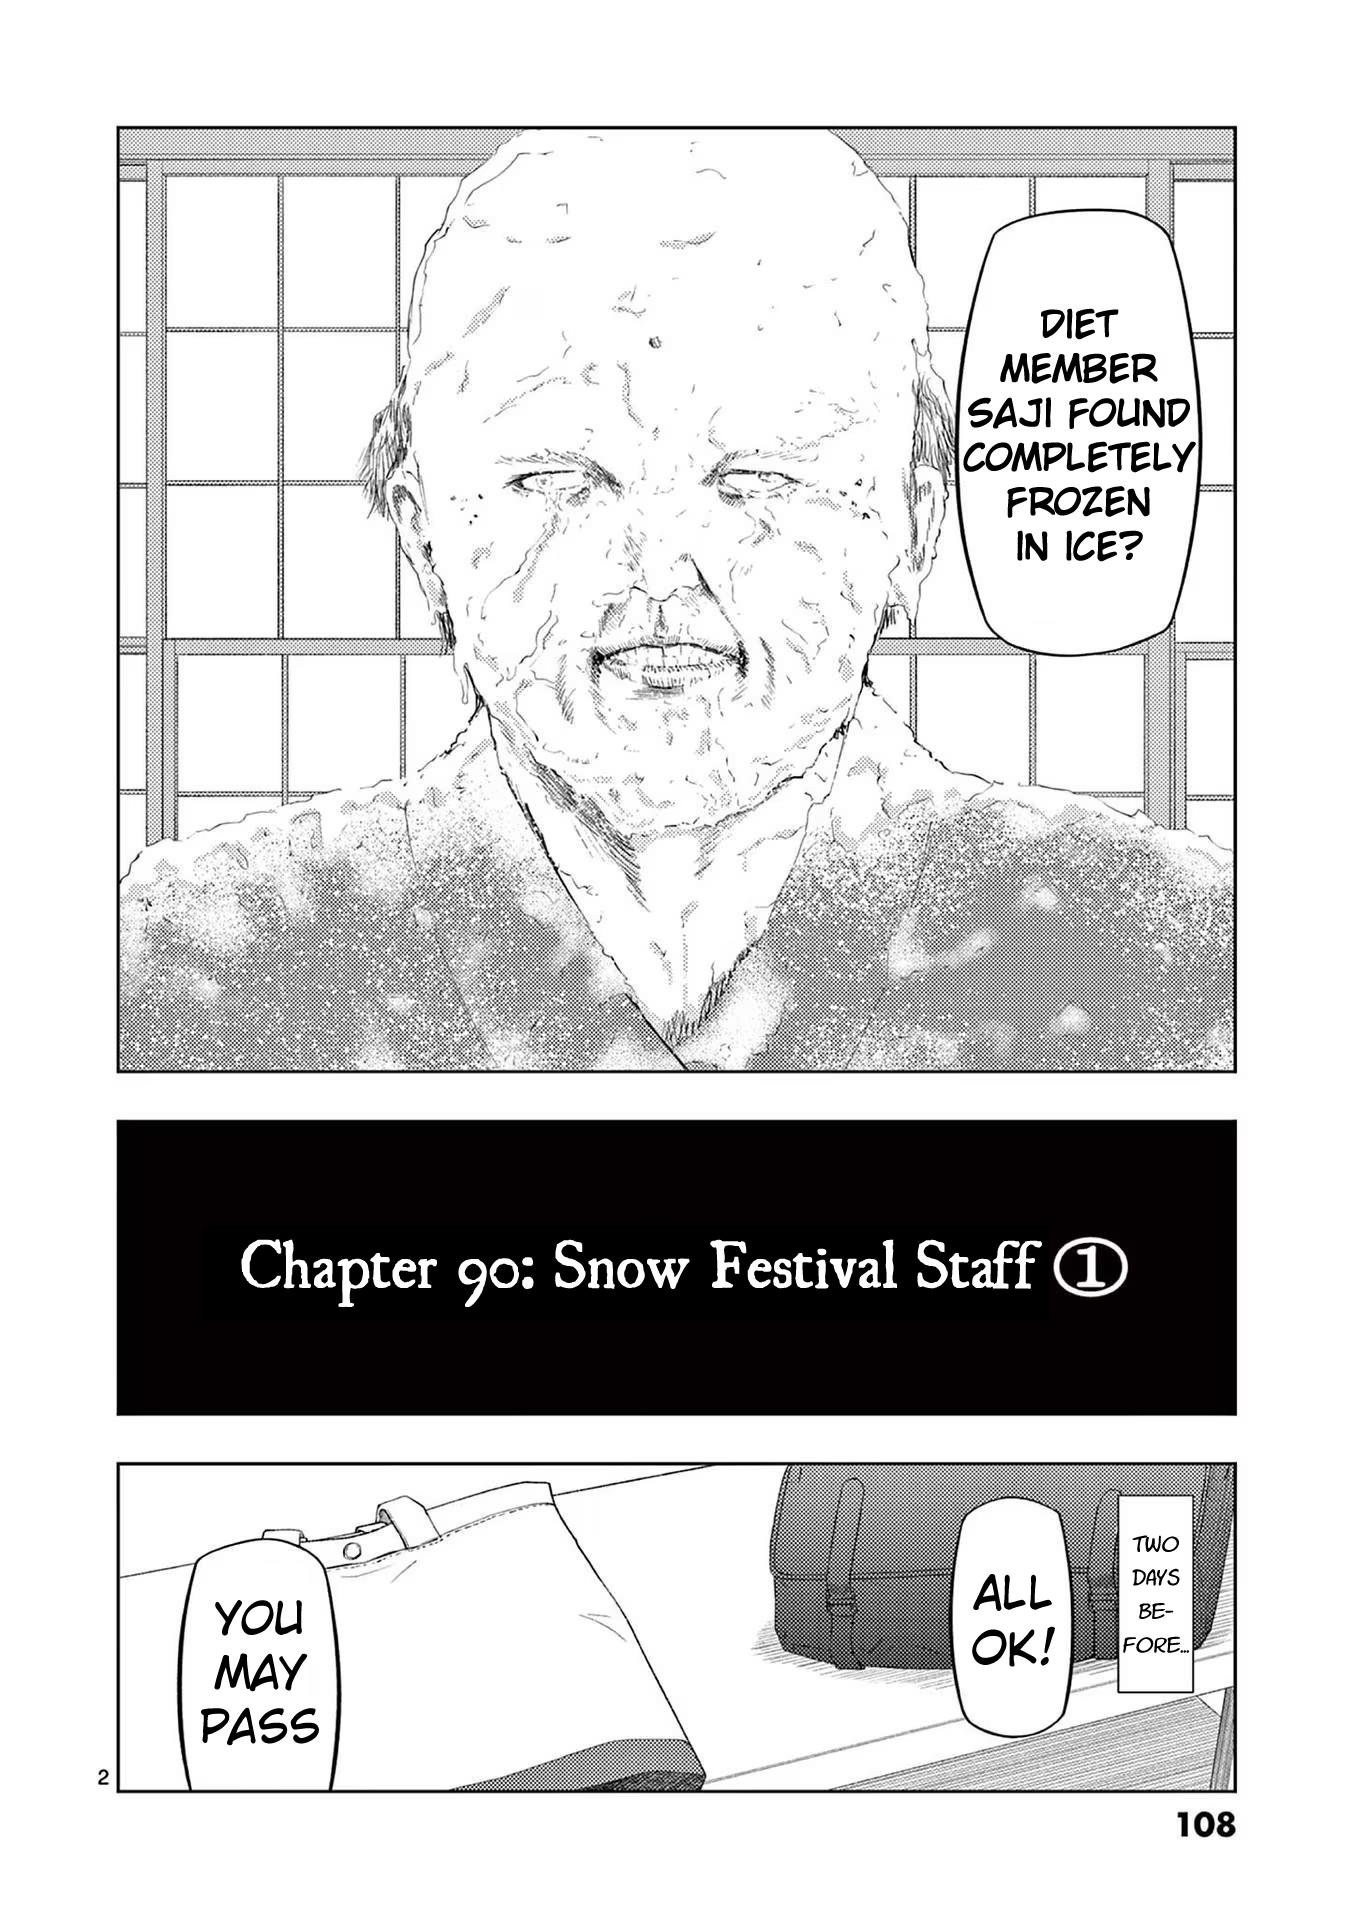 Ura Baito: Toubou Kinshi Vol.8 Chapter 90: Snow Festival Staff ① - Picture 2